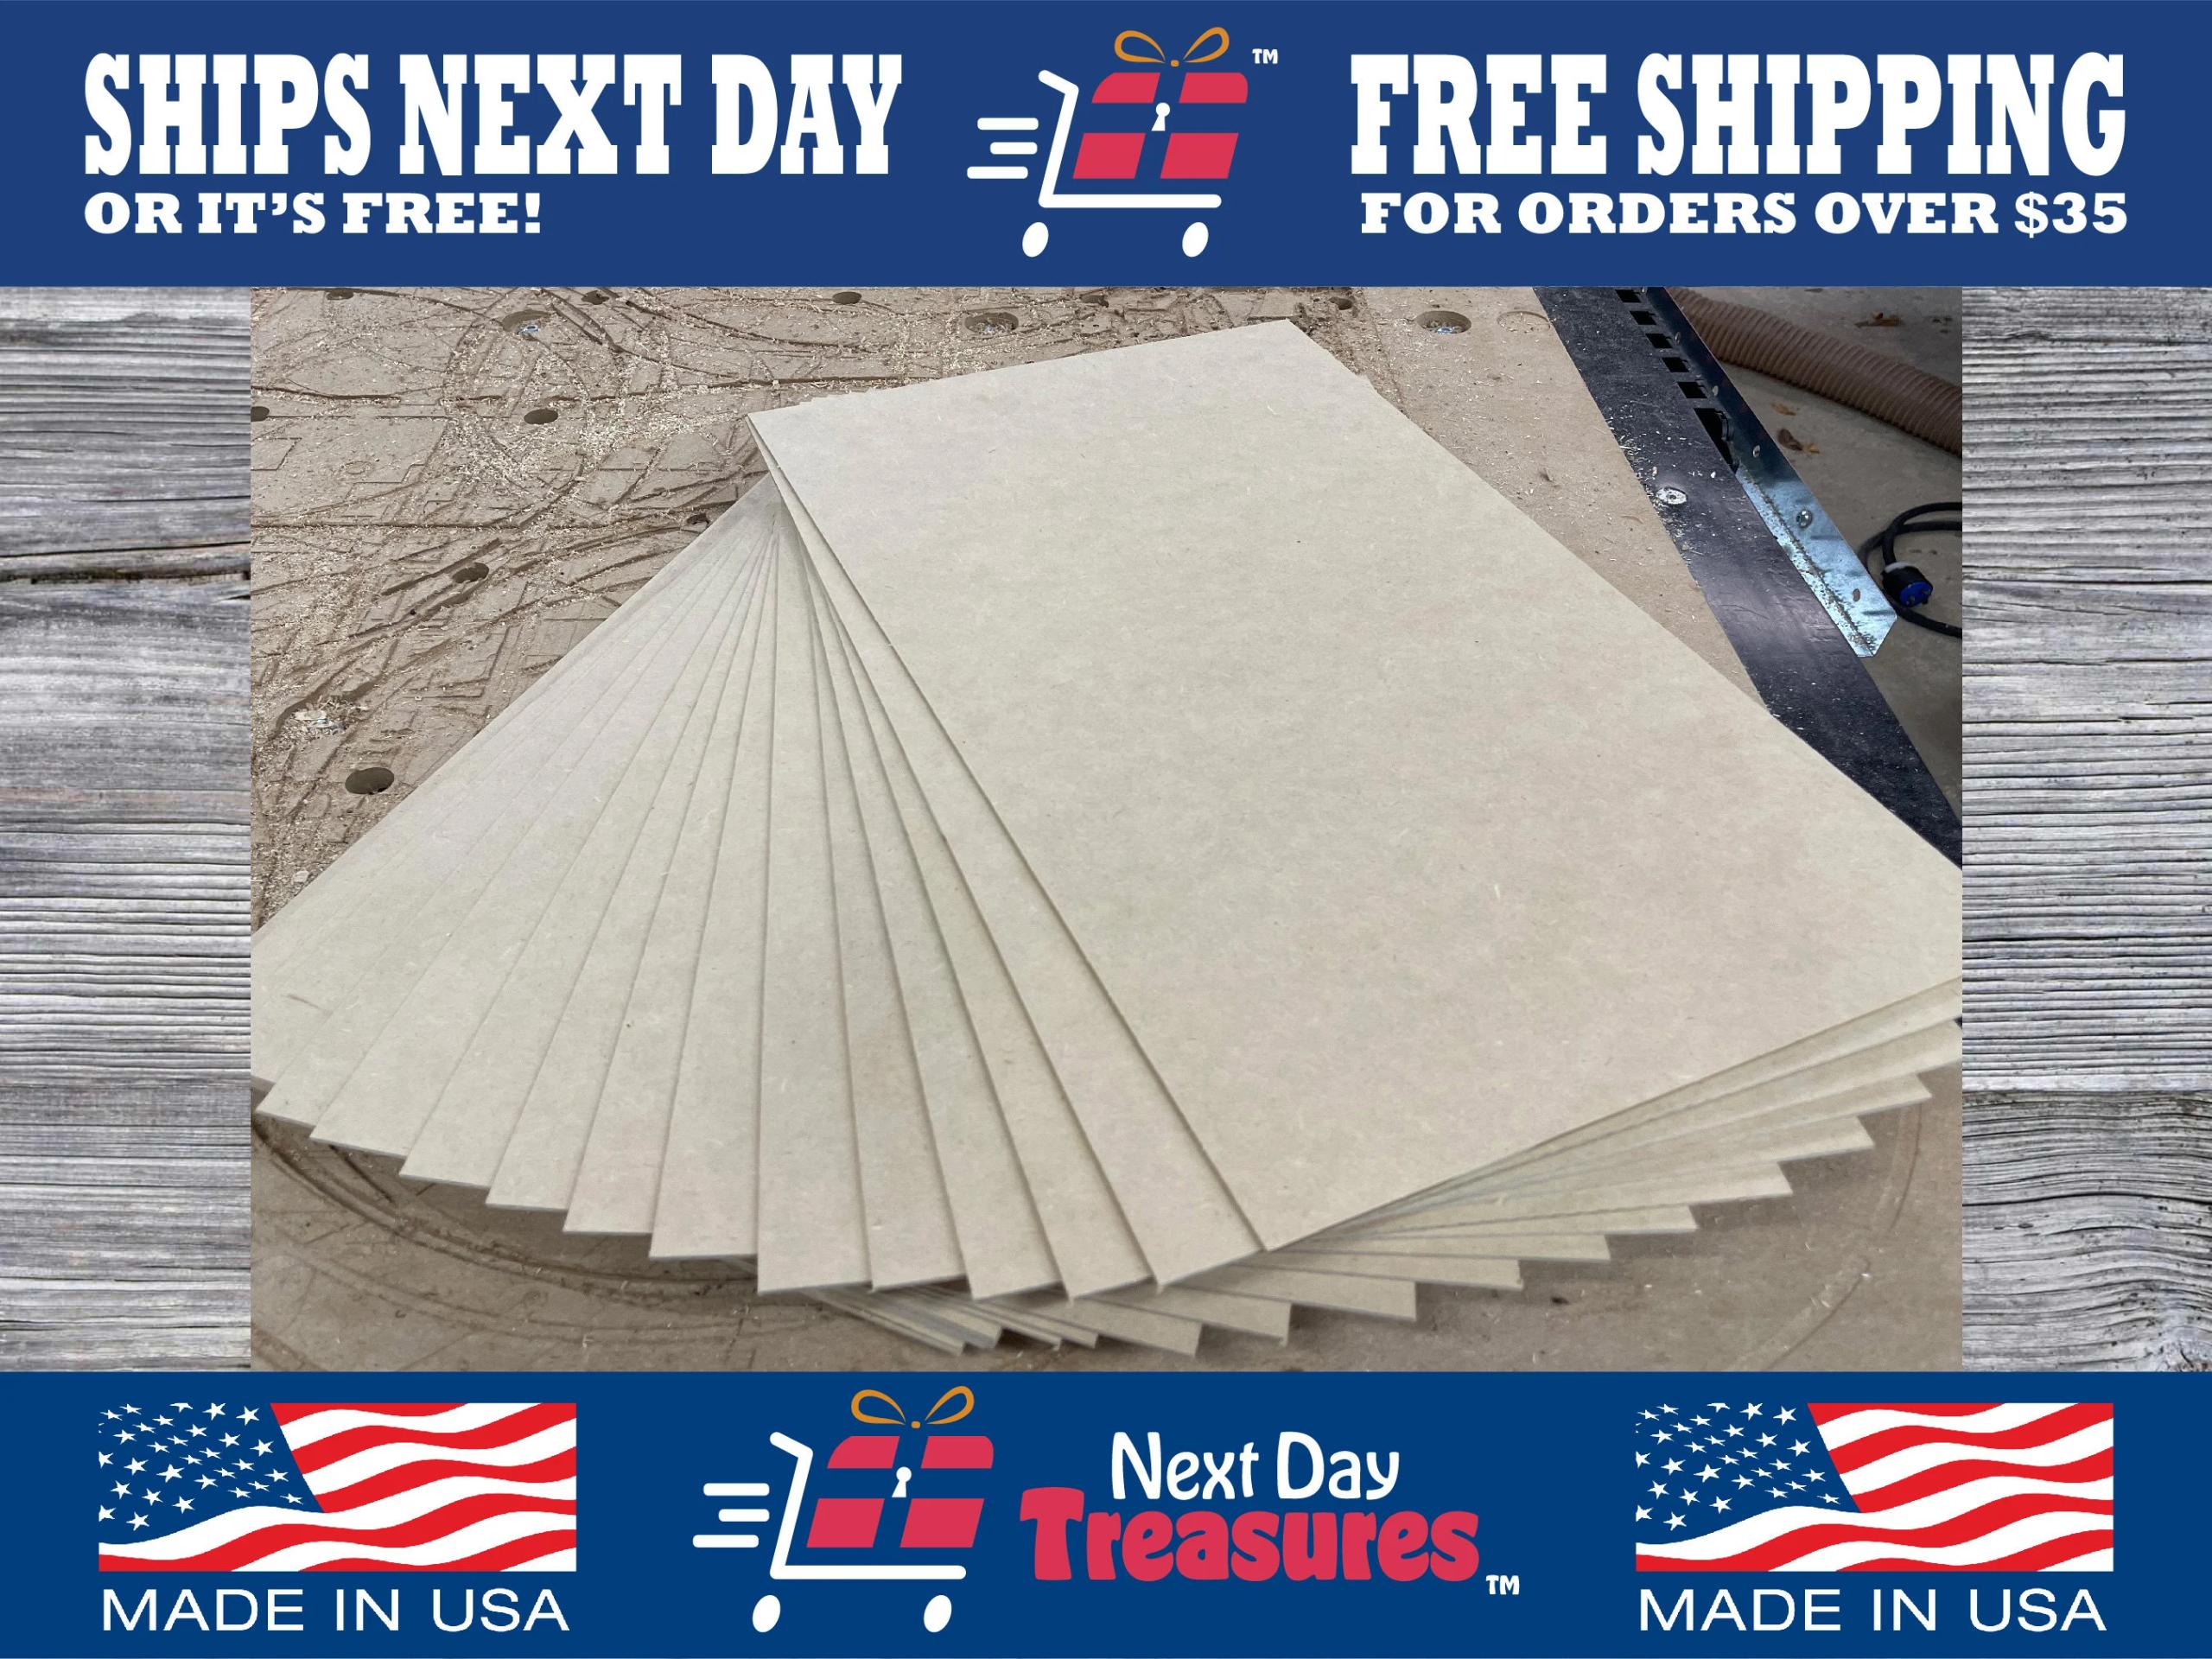 1/8 MDF - **NOT SHINY** - Perfect for lasers/Glowforge – Laser Wood Supplies